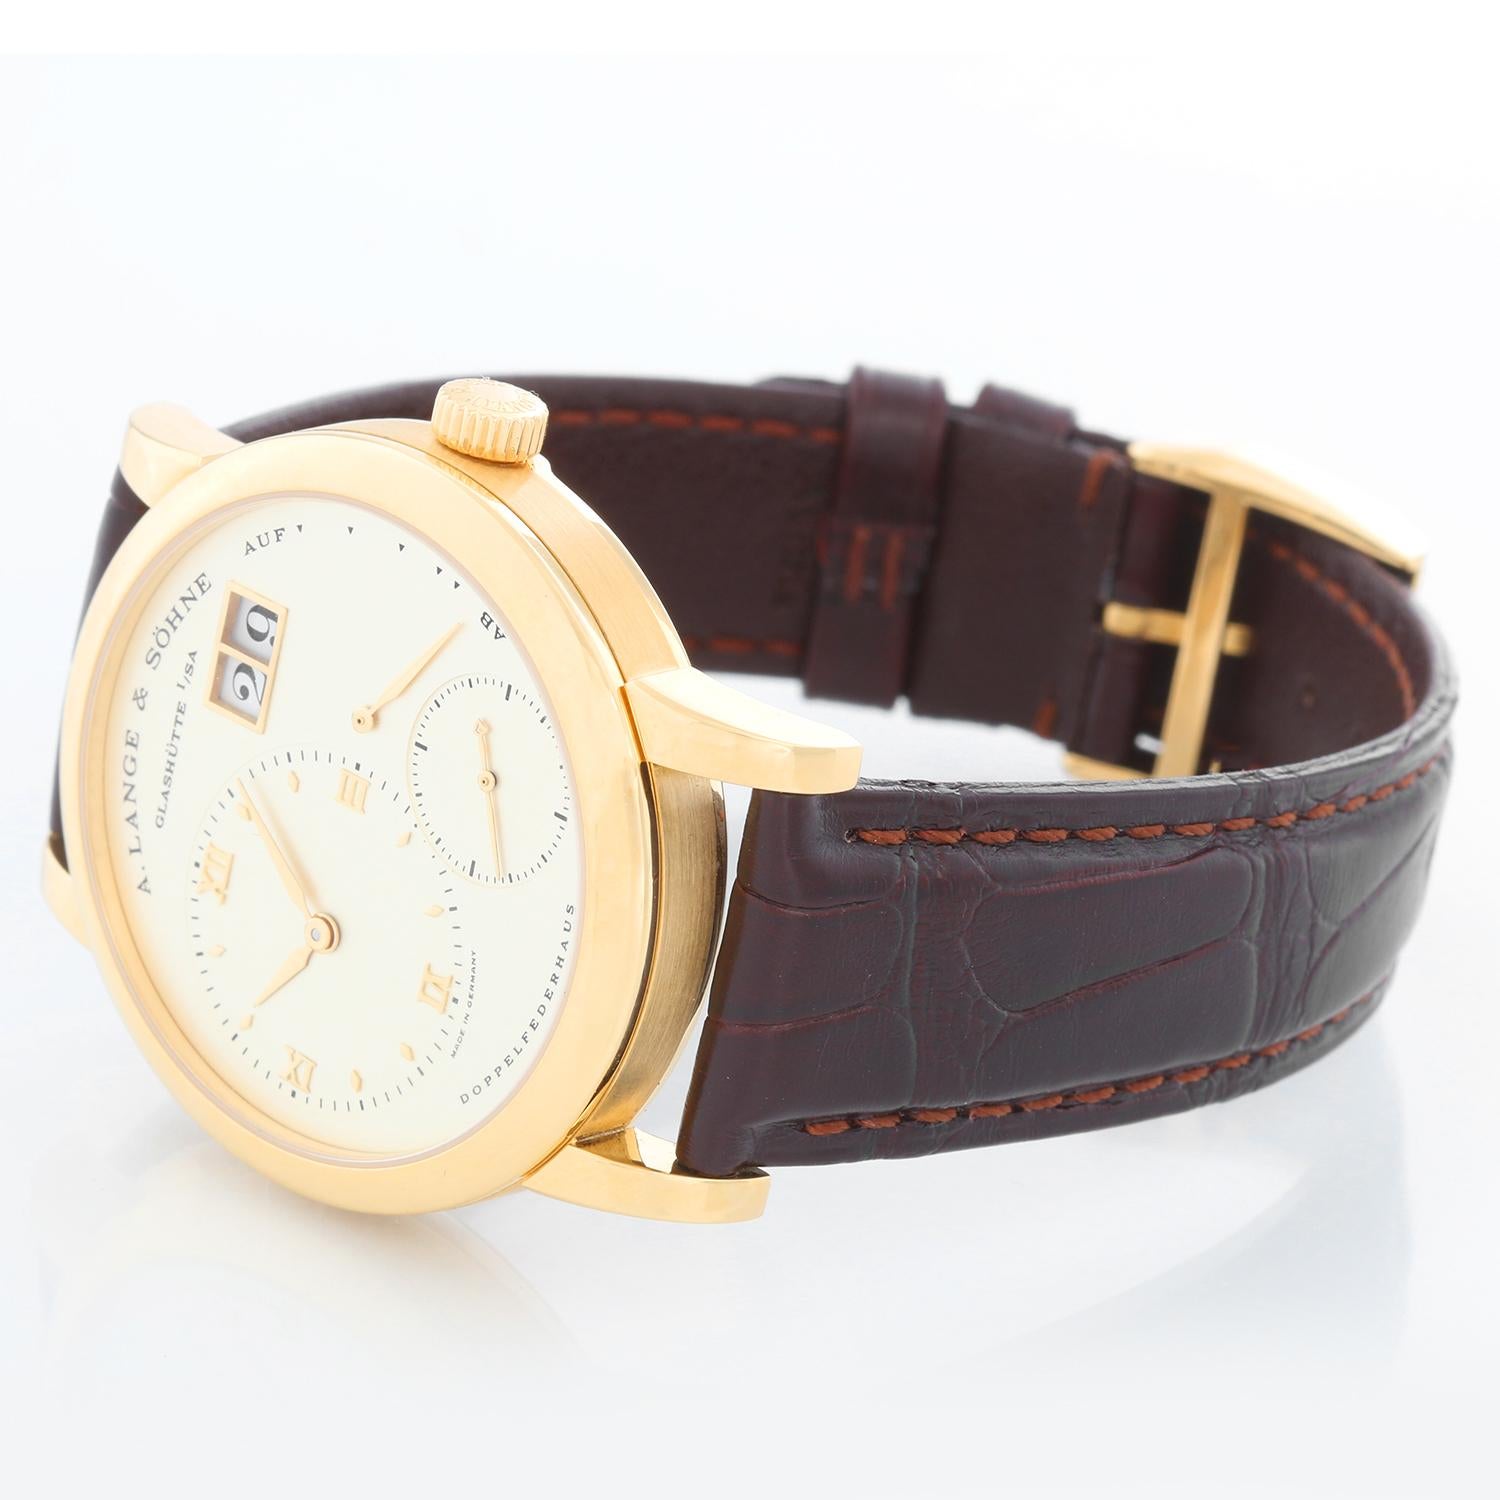 A. Lange & Sohne  Lange 1 Yellow Gold Men's Power Reserve Big Date Watch 101.022 - Manual winding. Yellow gold case with exposition back (37mm diameter). Silver dial with offset time dial with Roman numerals; sub seconds, power reserve indicator;